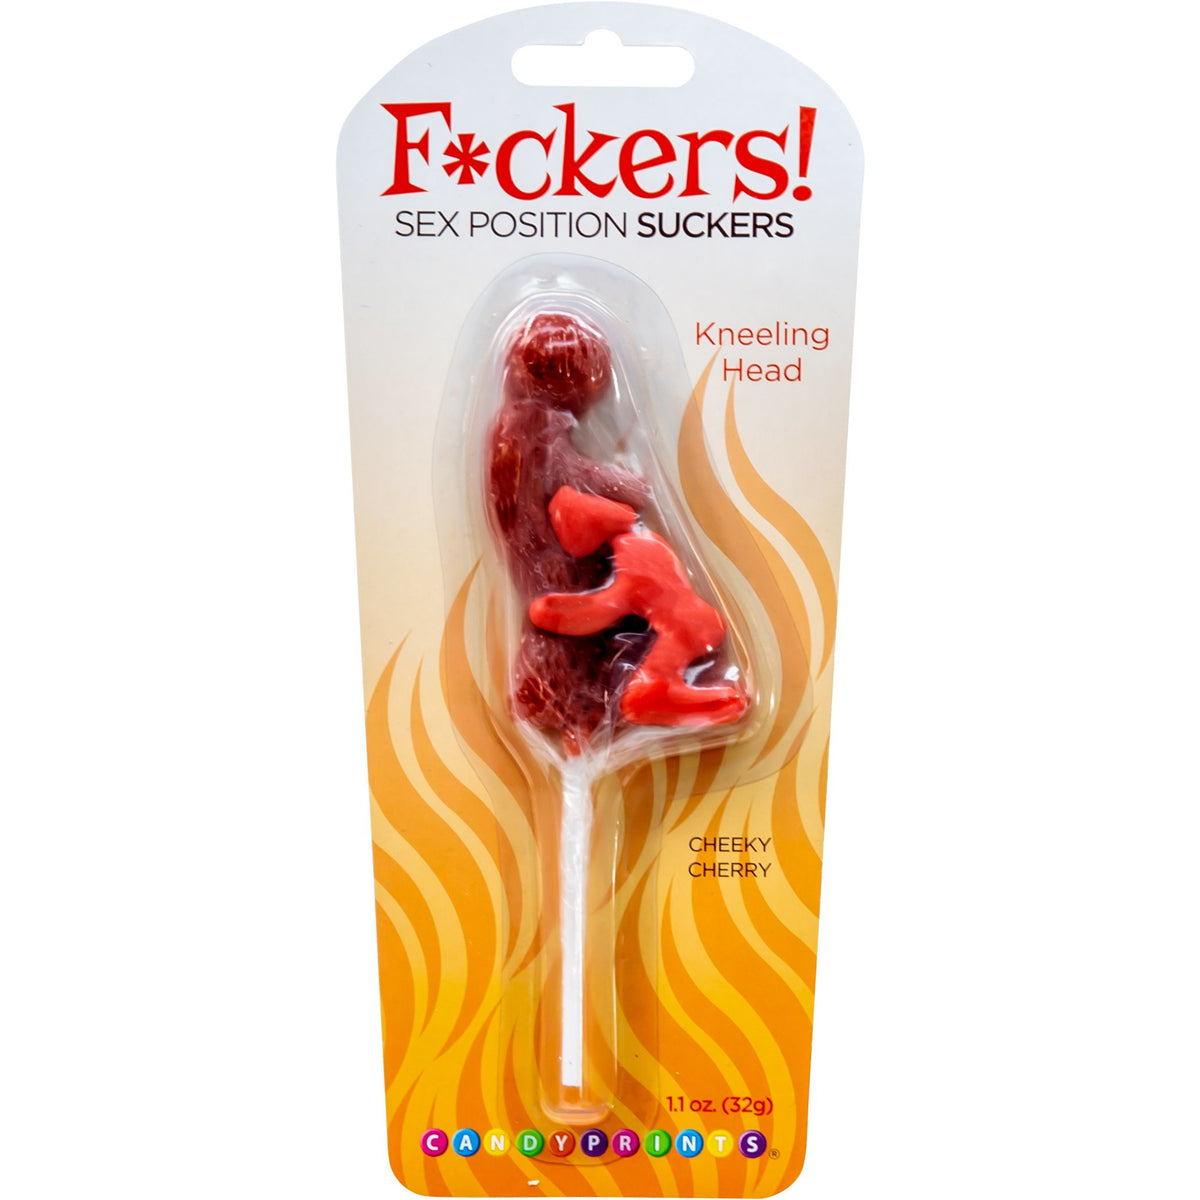 Candyprints Fuckers! Sex Position Sucker Candy - Cherry